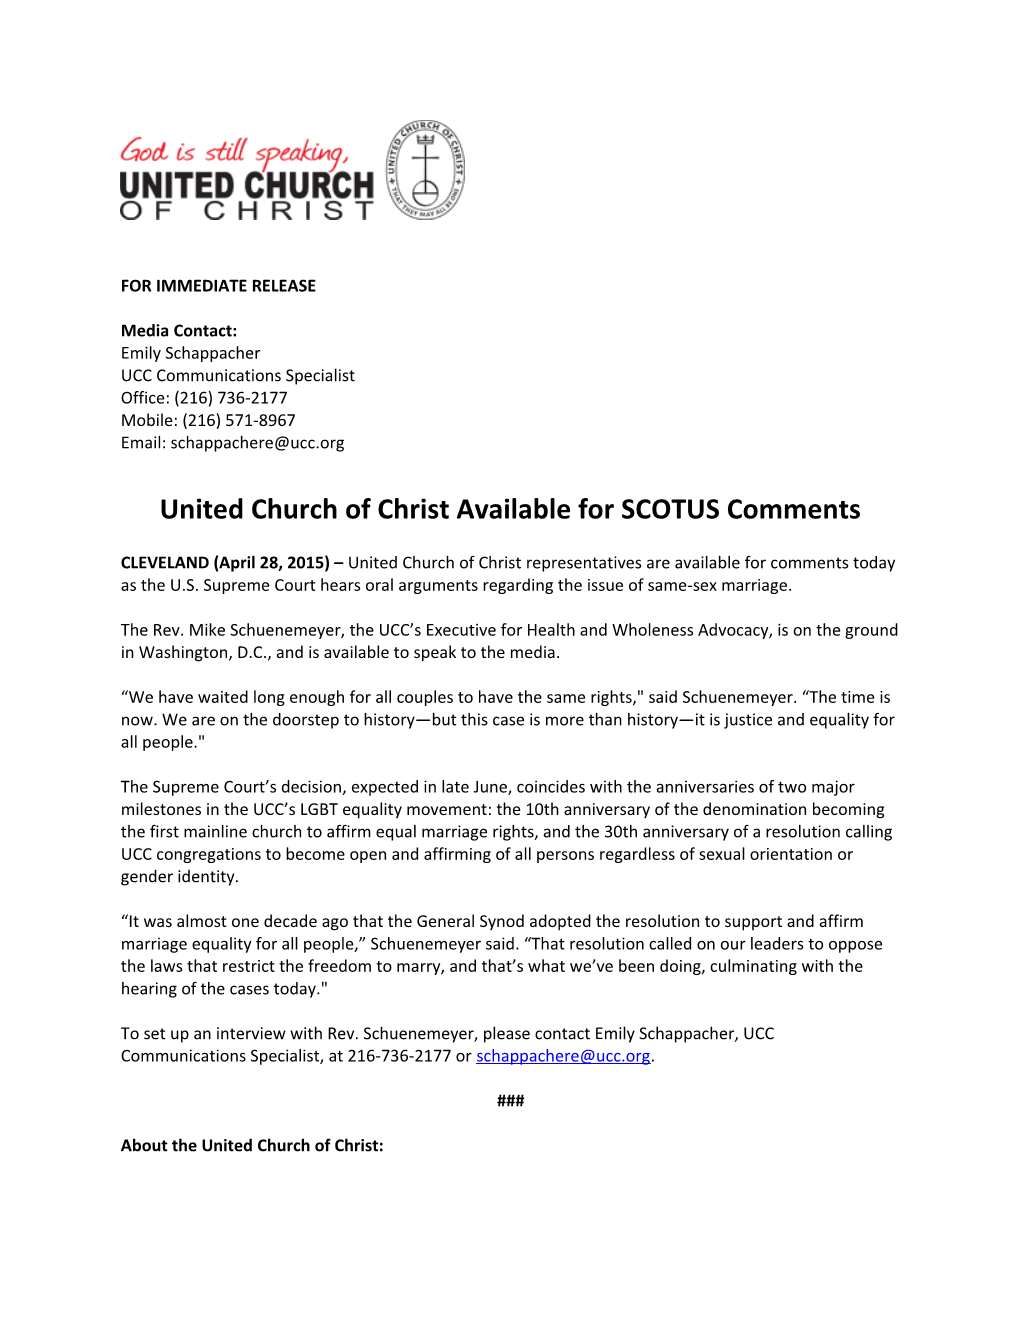 United Church of Christ Available for SCOTUS Comments